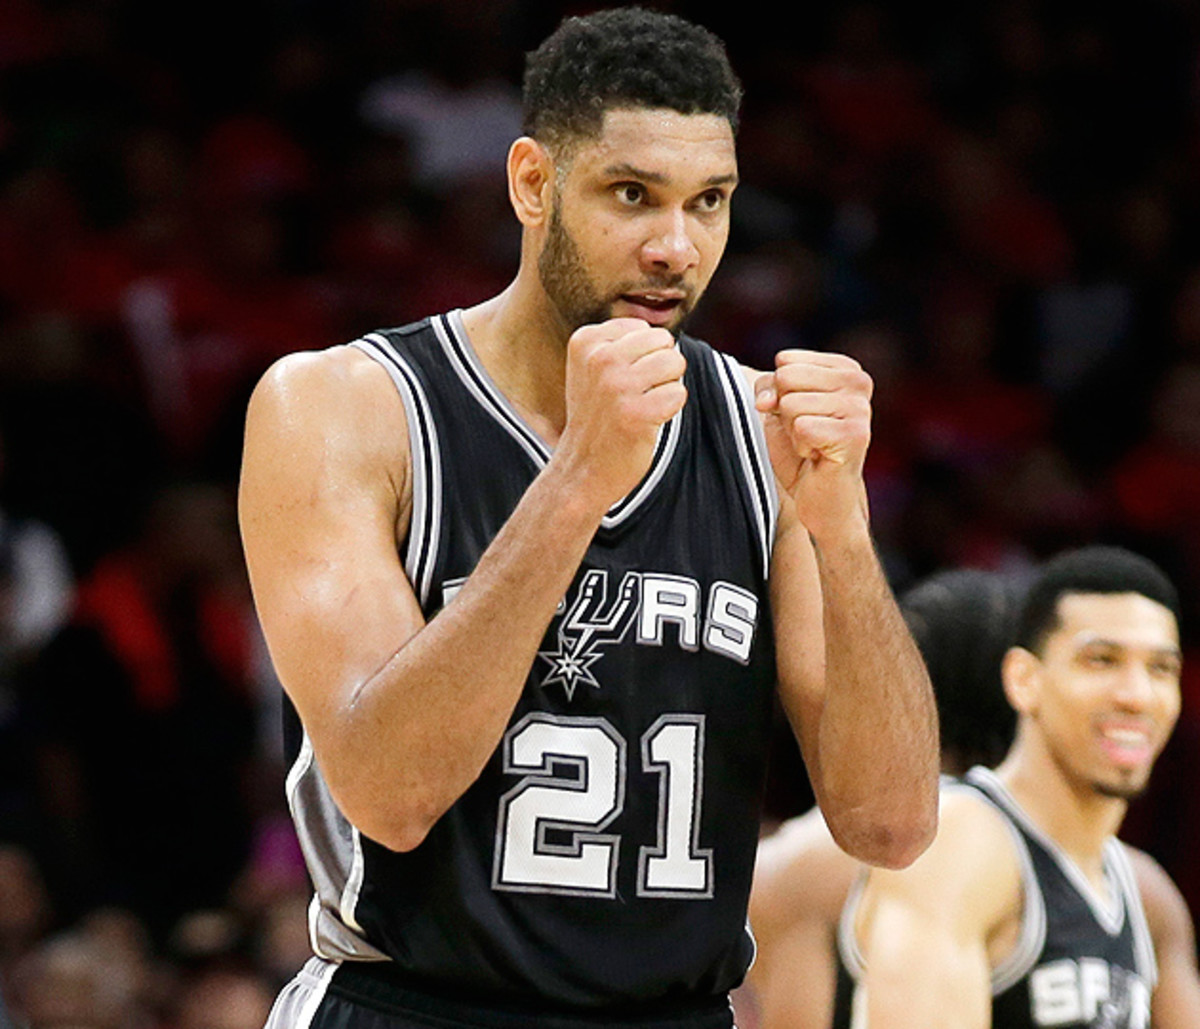 tim-duncan-spurs-clippers-28-points-game-2.jpg